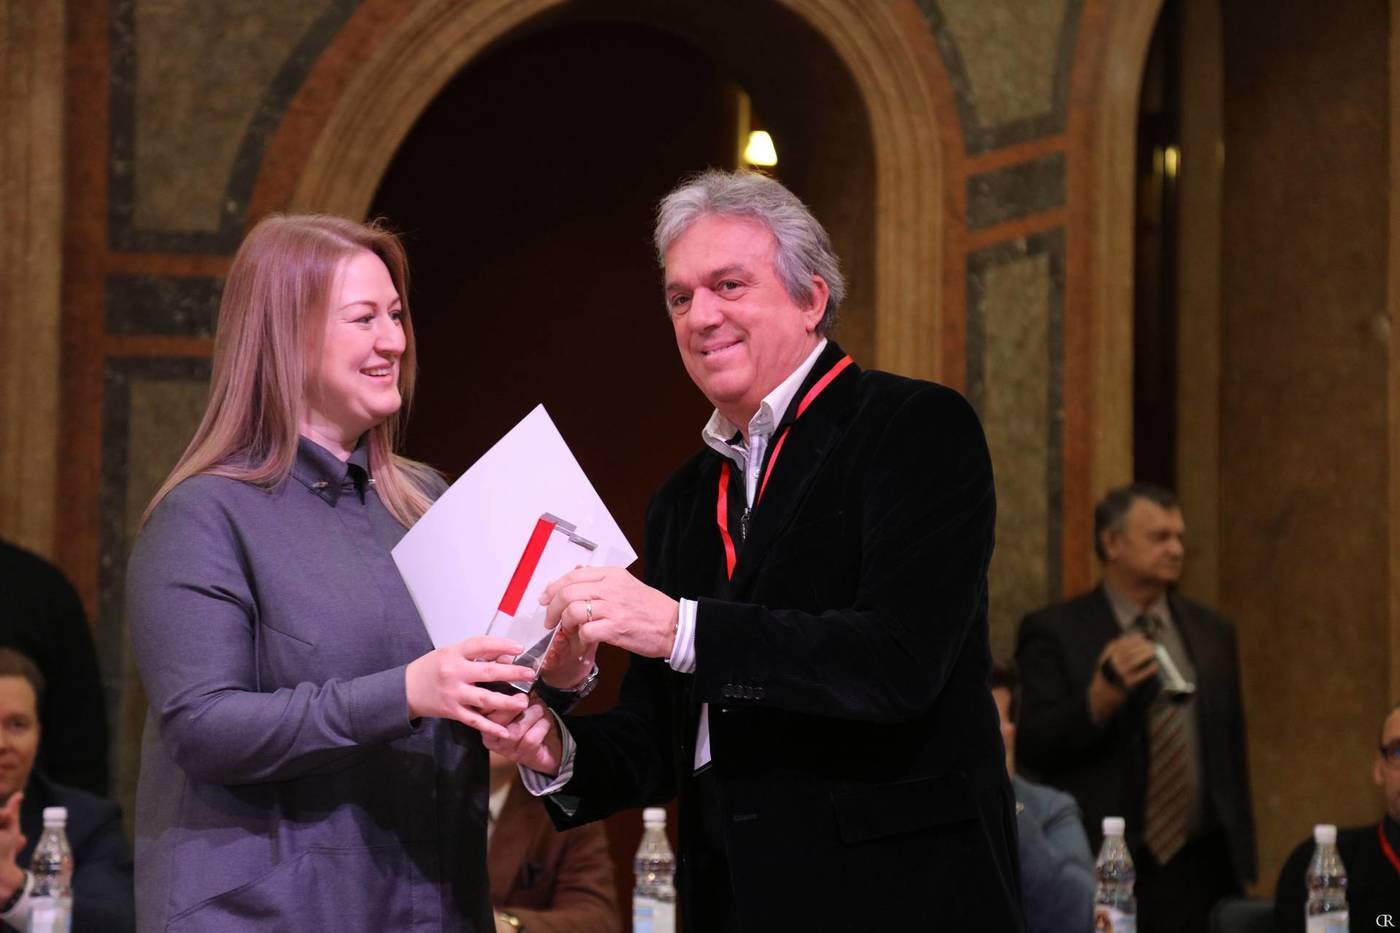 Marco Piva hands the First Russian National Award for the Contribution to the Development of Design in Russia to Ekaterina Elizarova at Stieglitz State Academy of Art and Design